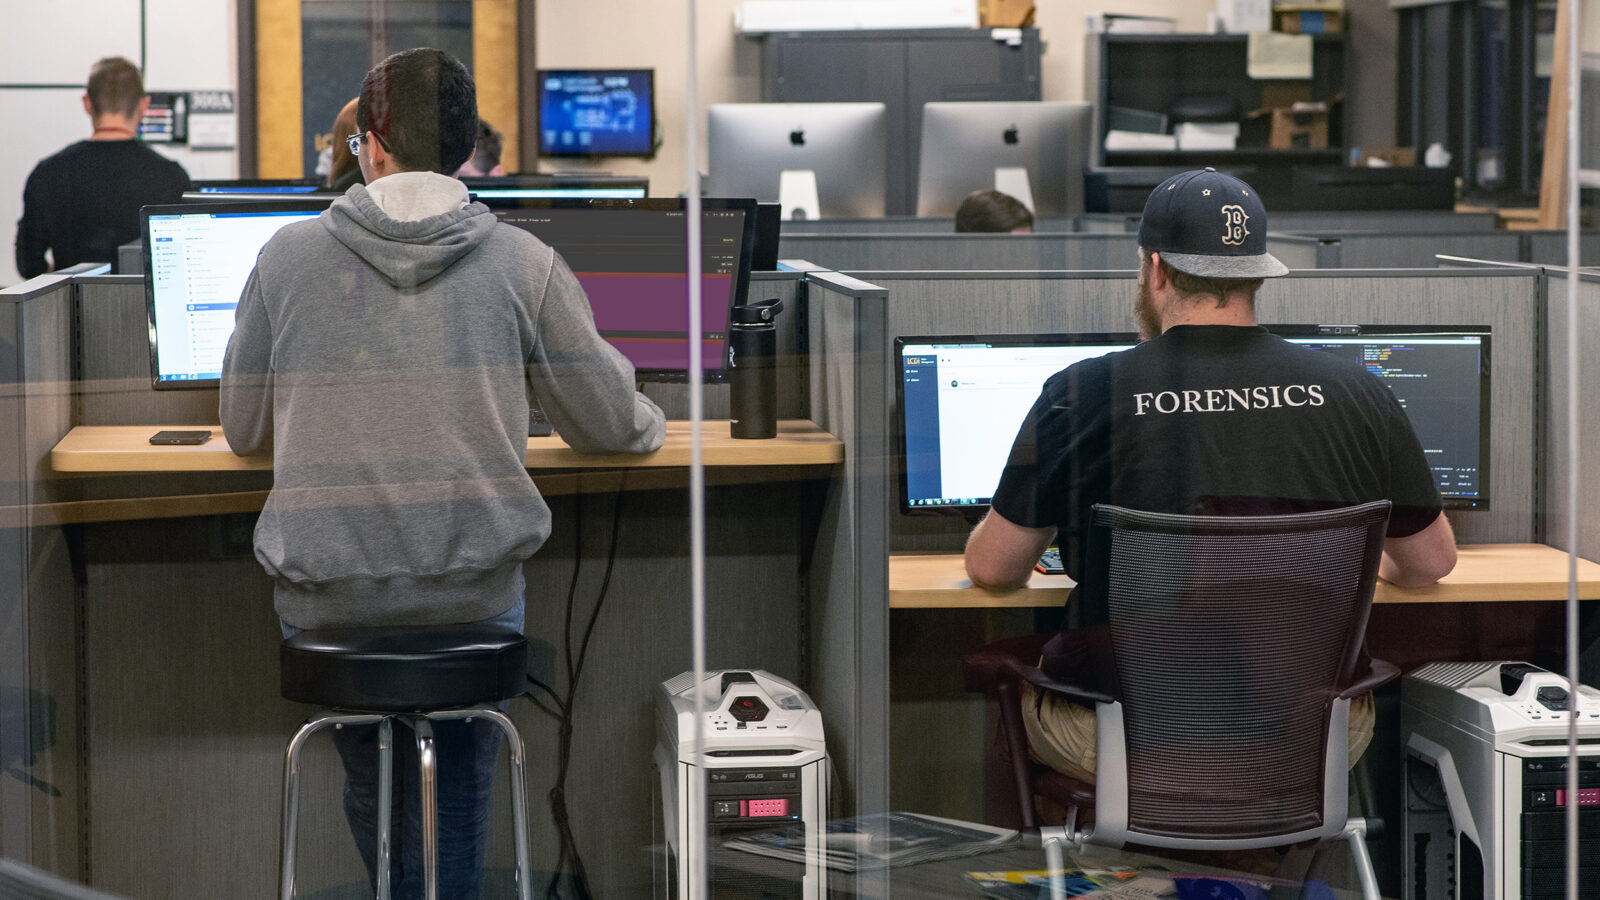 students facing computers; "forensics" on the back of student t-shirt